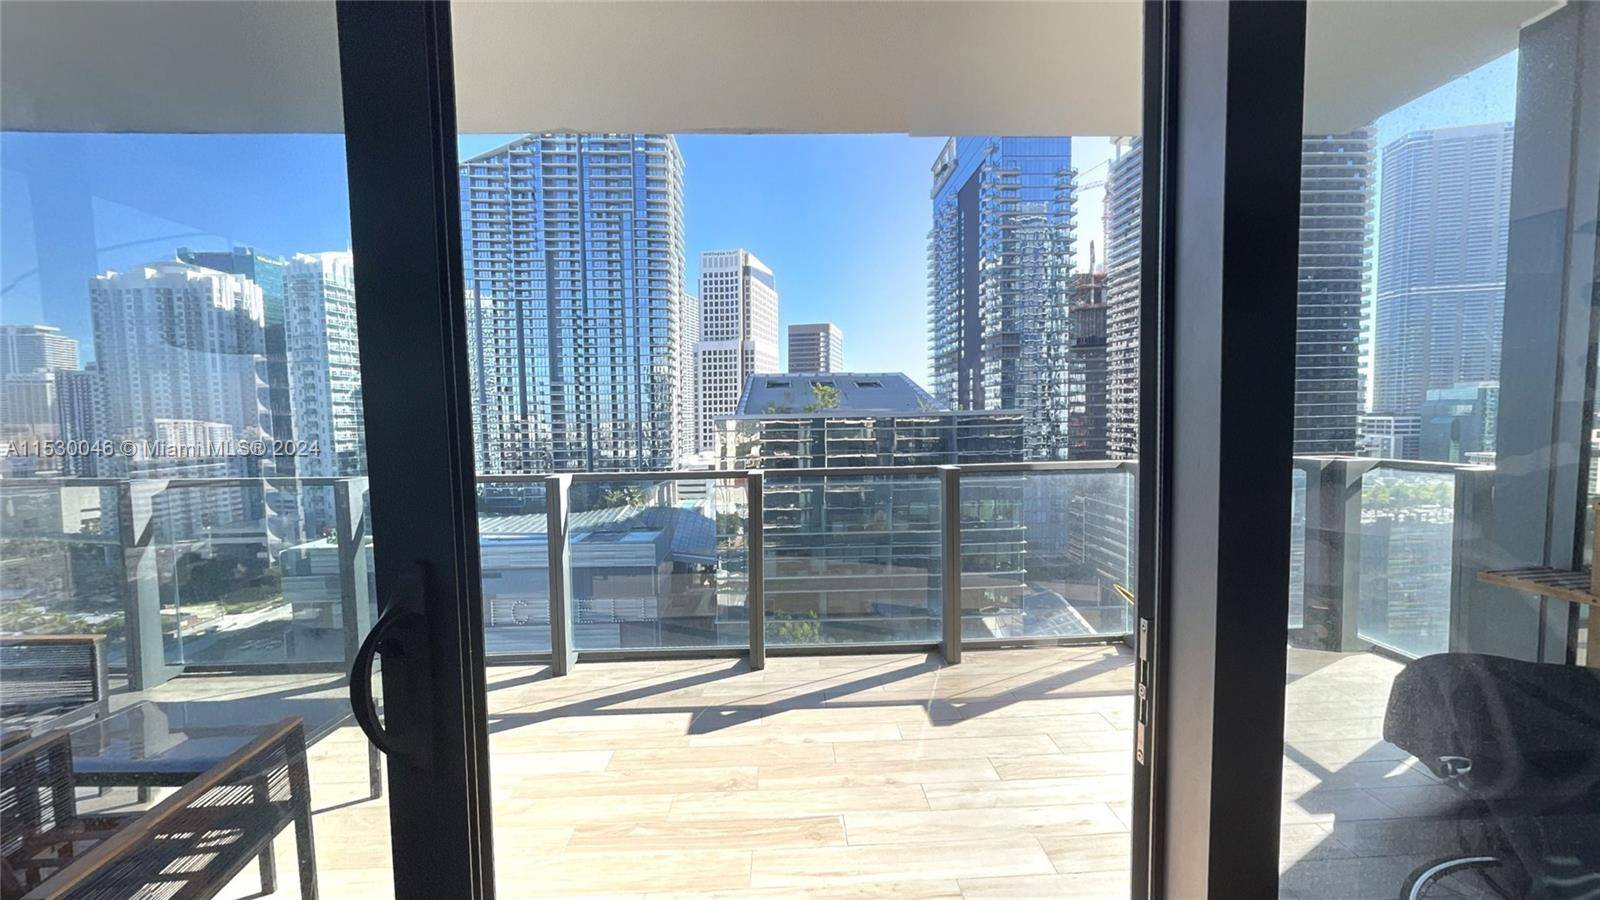 Elevate your lifestyle in the prestigious Rise Brickell with this 17th floor corner apartment, showcasing 2 Bedrooms and 2.